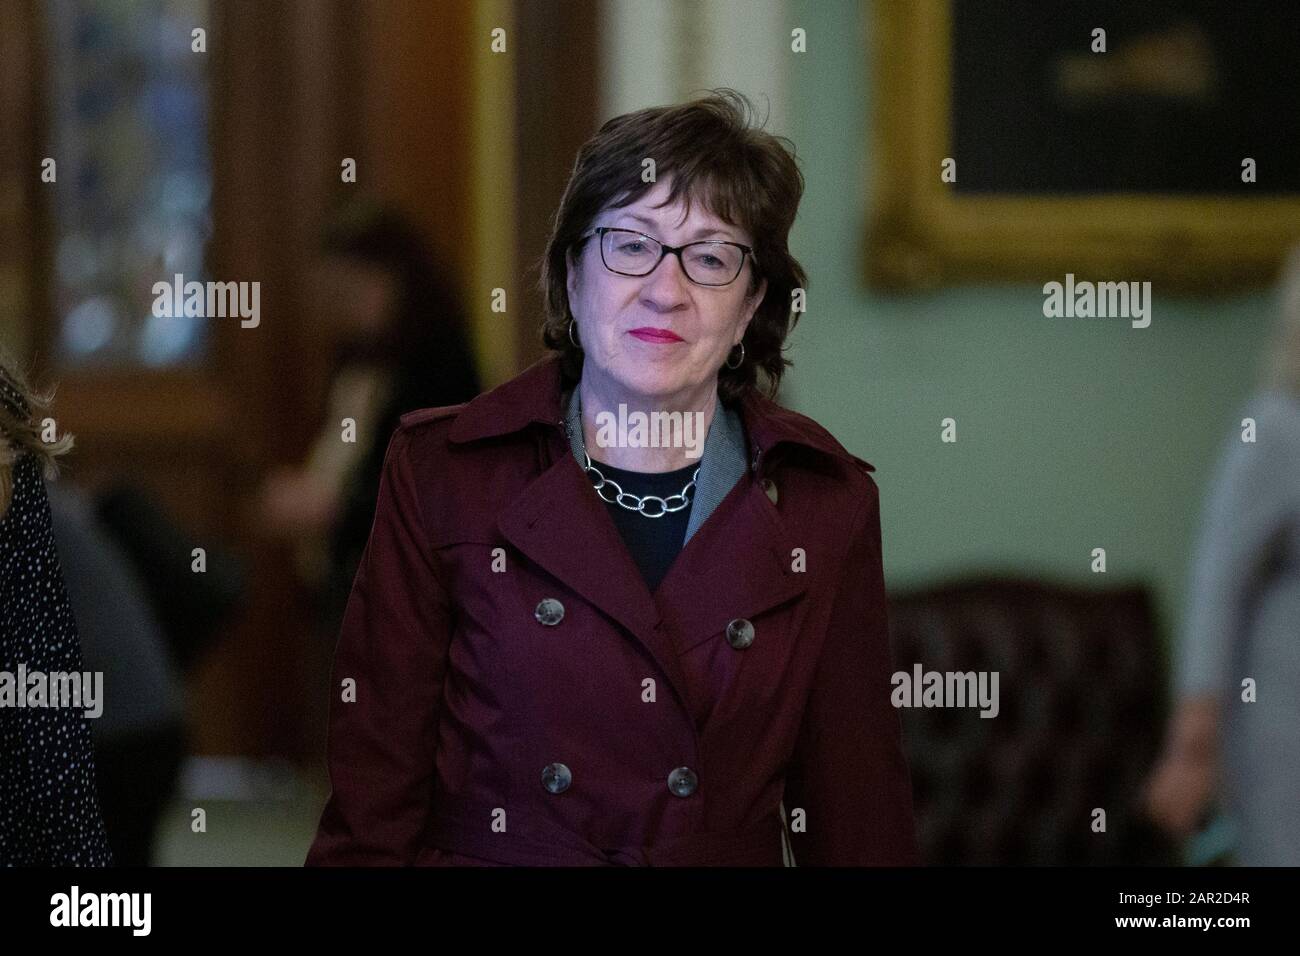 Washington DC, USA. 25th Jan 2020.  United States Senator Susan Collins (Republican of Maine) walks through the Ohio Clock Corridor of the United States Capitol in Washington, DC, U.S., on Saturday, January 25, 2020 as Jay Sekulow, personal lawyer for President Donald Trump, and White House counsel Pat Cipollone prepare to present their defense of United States President Donald J. Trump on the Senate Floor. Credit: Stefani Reynolds/CNP /MediaPunch Stock Photo